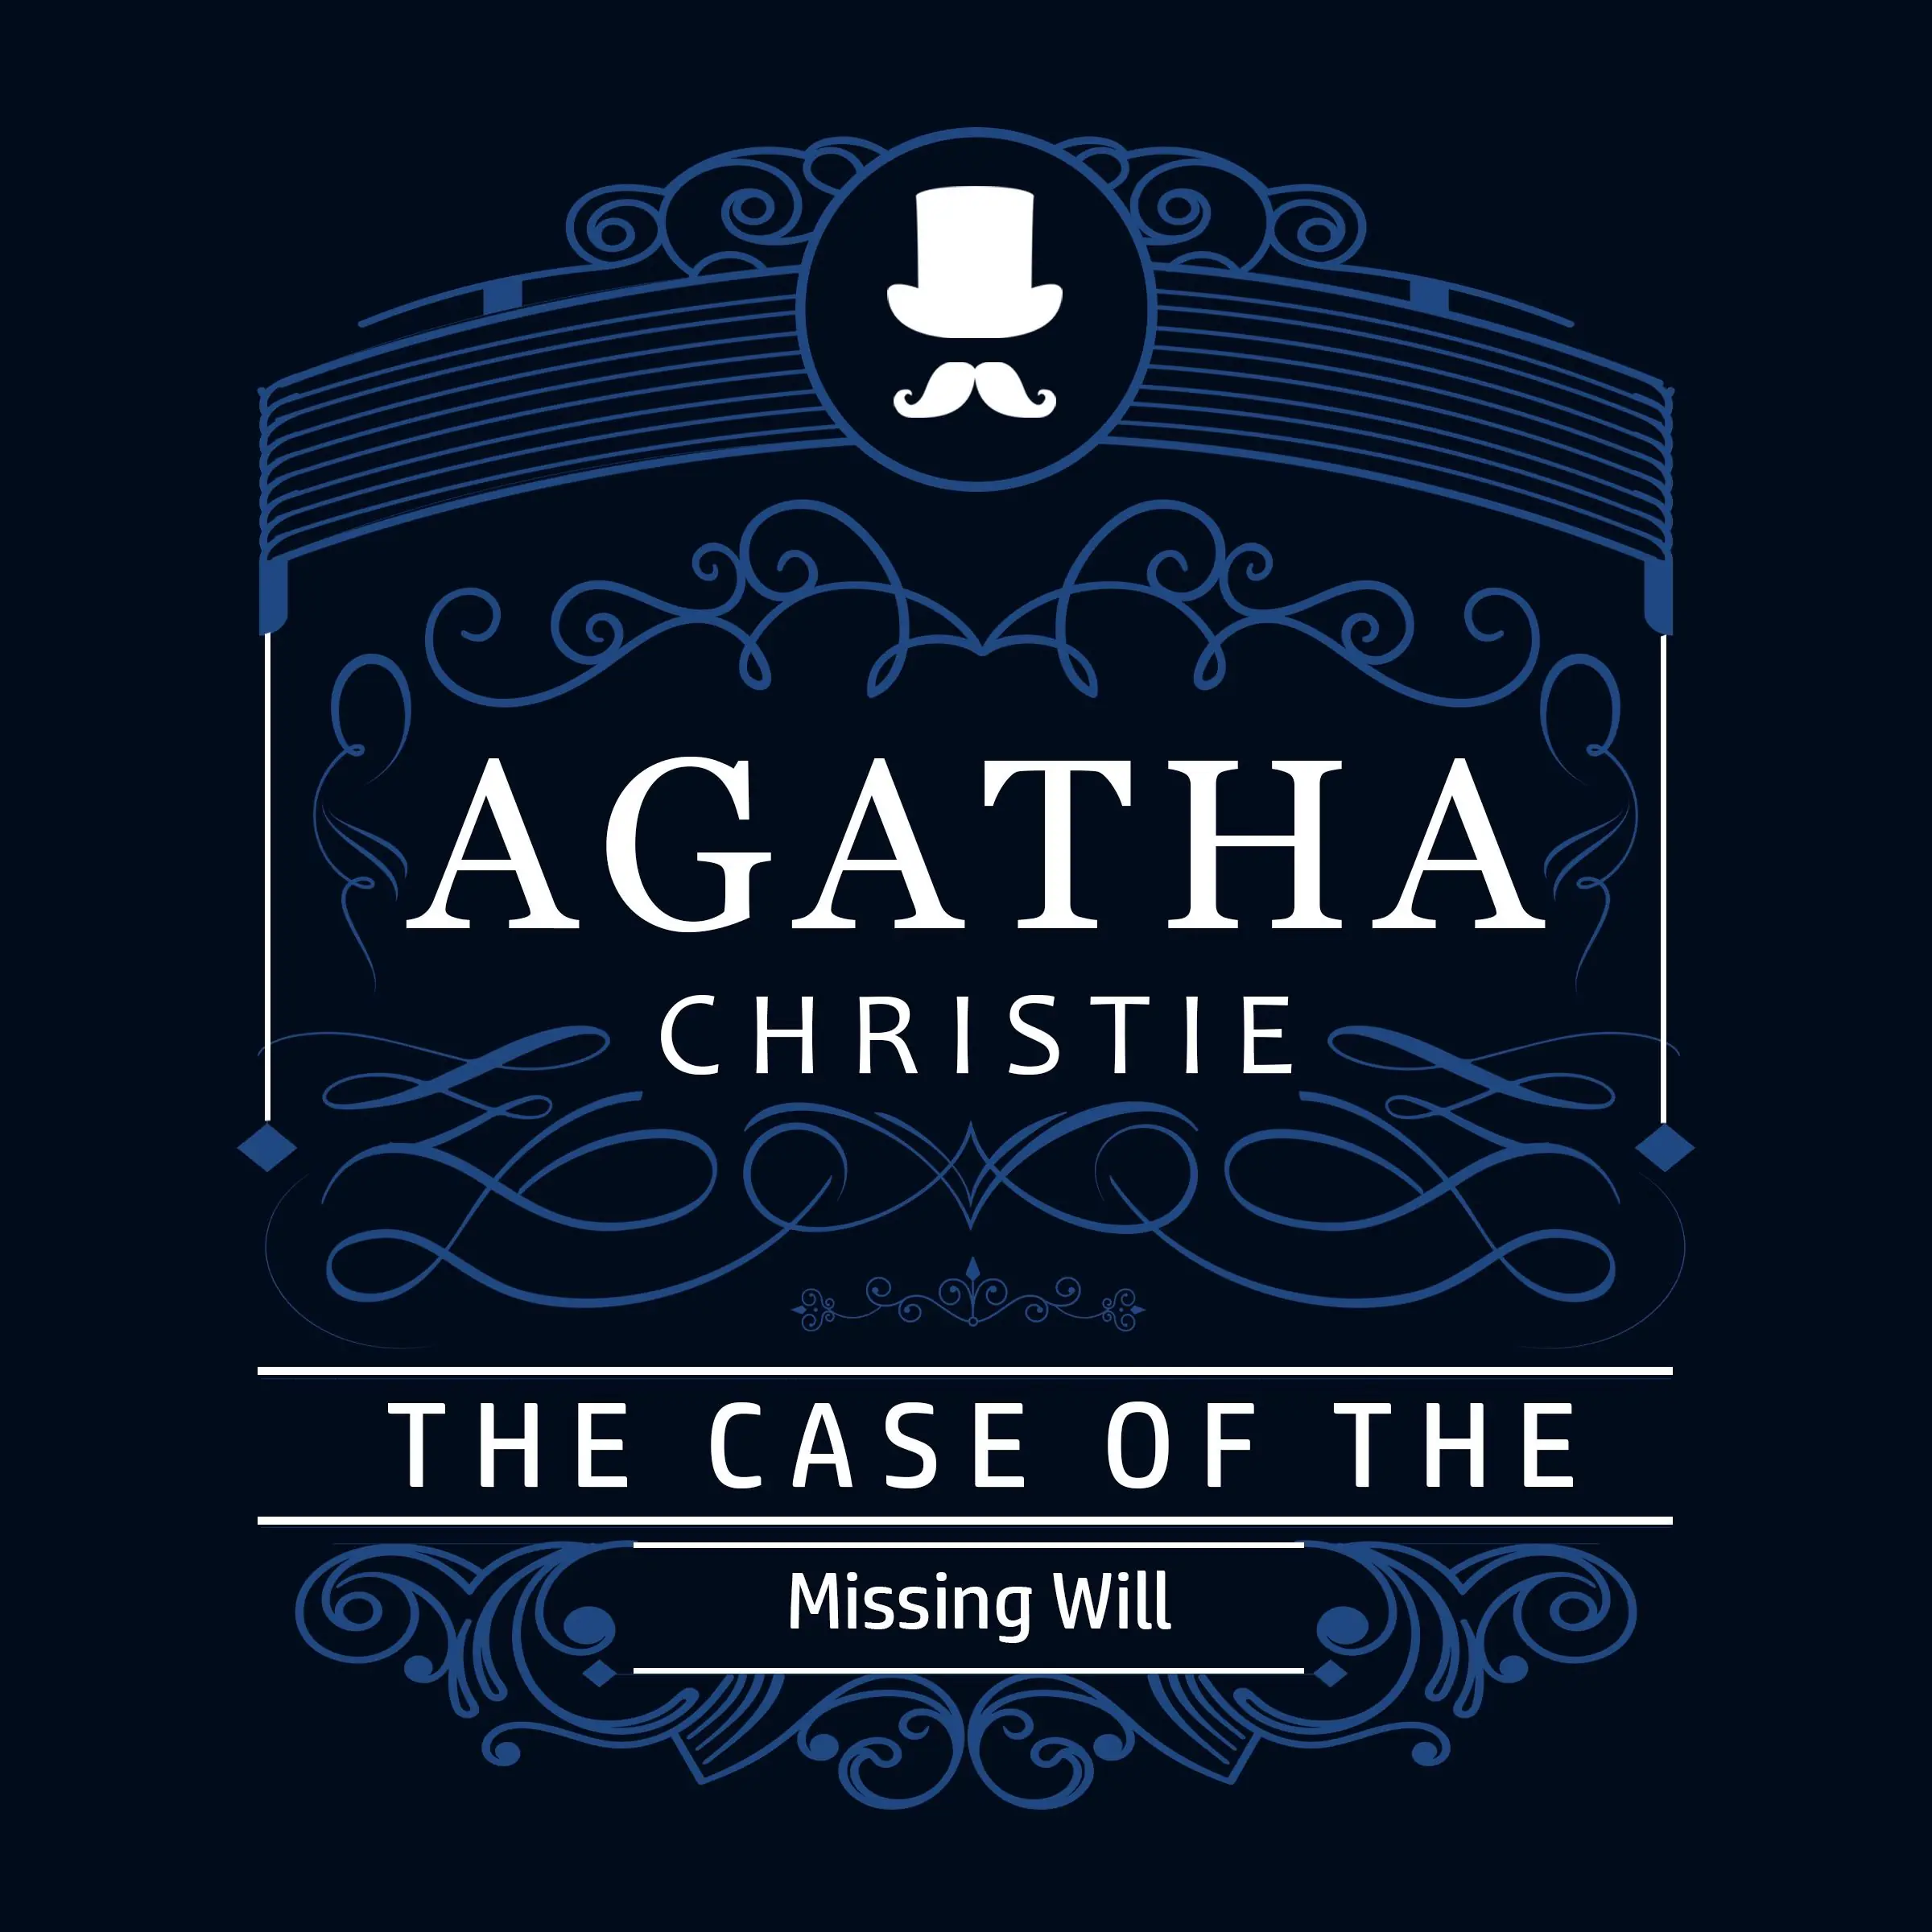 The Case of the Missing Will (Part of the Hercule Poirot Series) by Agatha Christie Audiobook